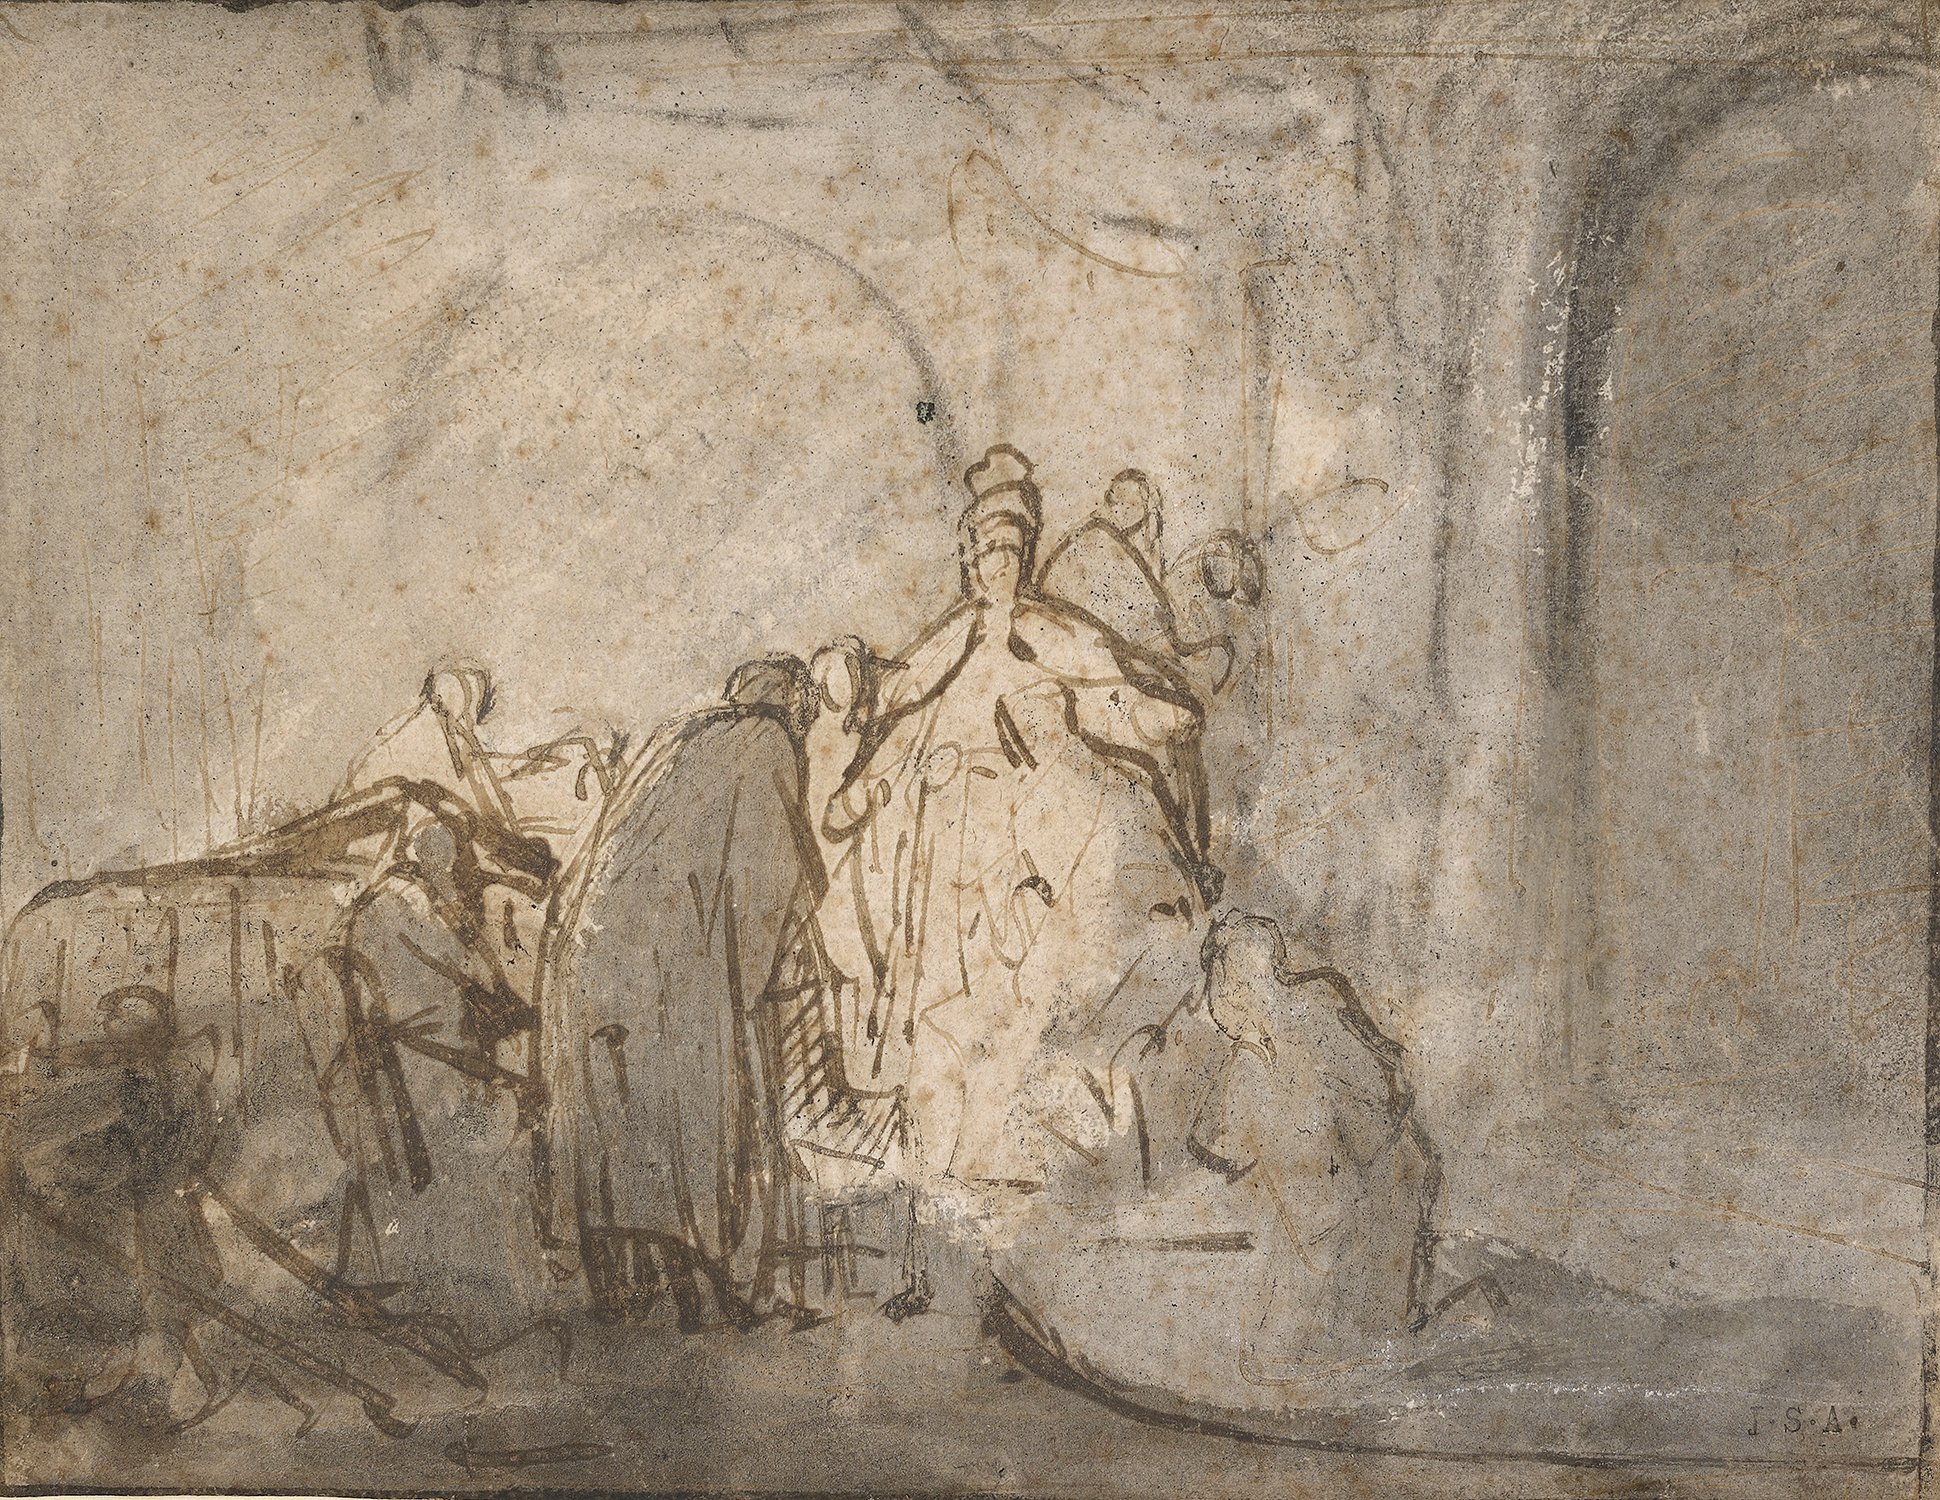 Rembrandt van Rijn (1606-1669), Judas Returning the Thirty Pieces of Silver (recto), ca. 1629, Pen and brown ink and gray wash over black chalk. Private collection